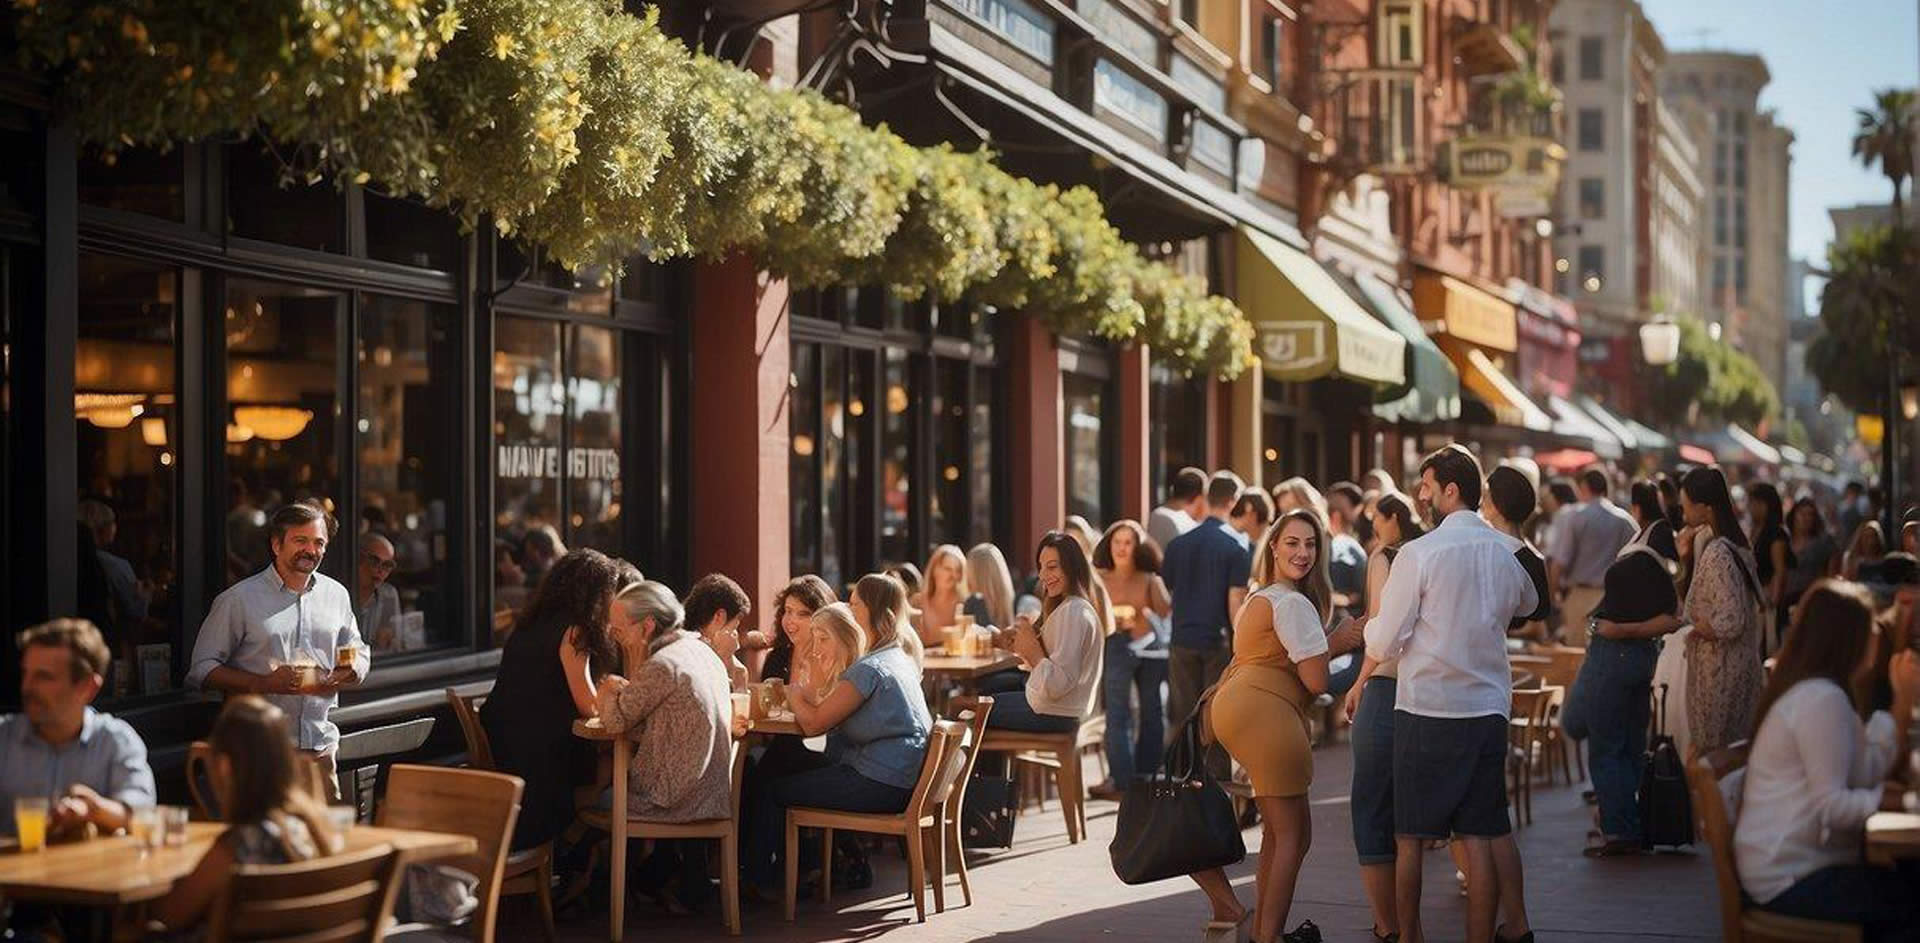 A bustling street lined with diverse restaurants, colorful outdoor dining areas, and people enjoying delicious food in the Gaslamp Quarter of San Diego